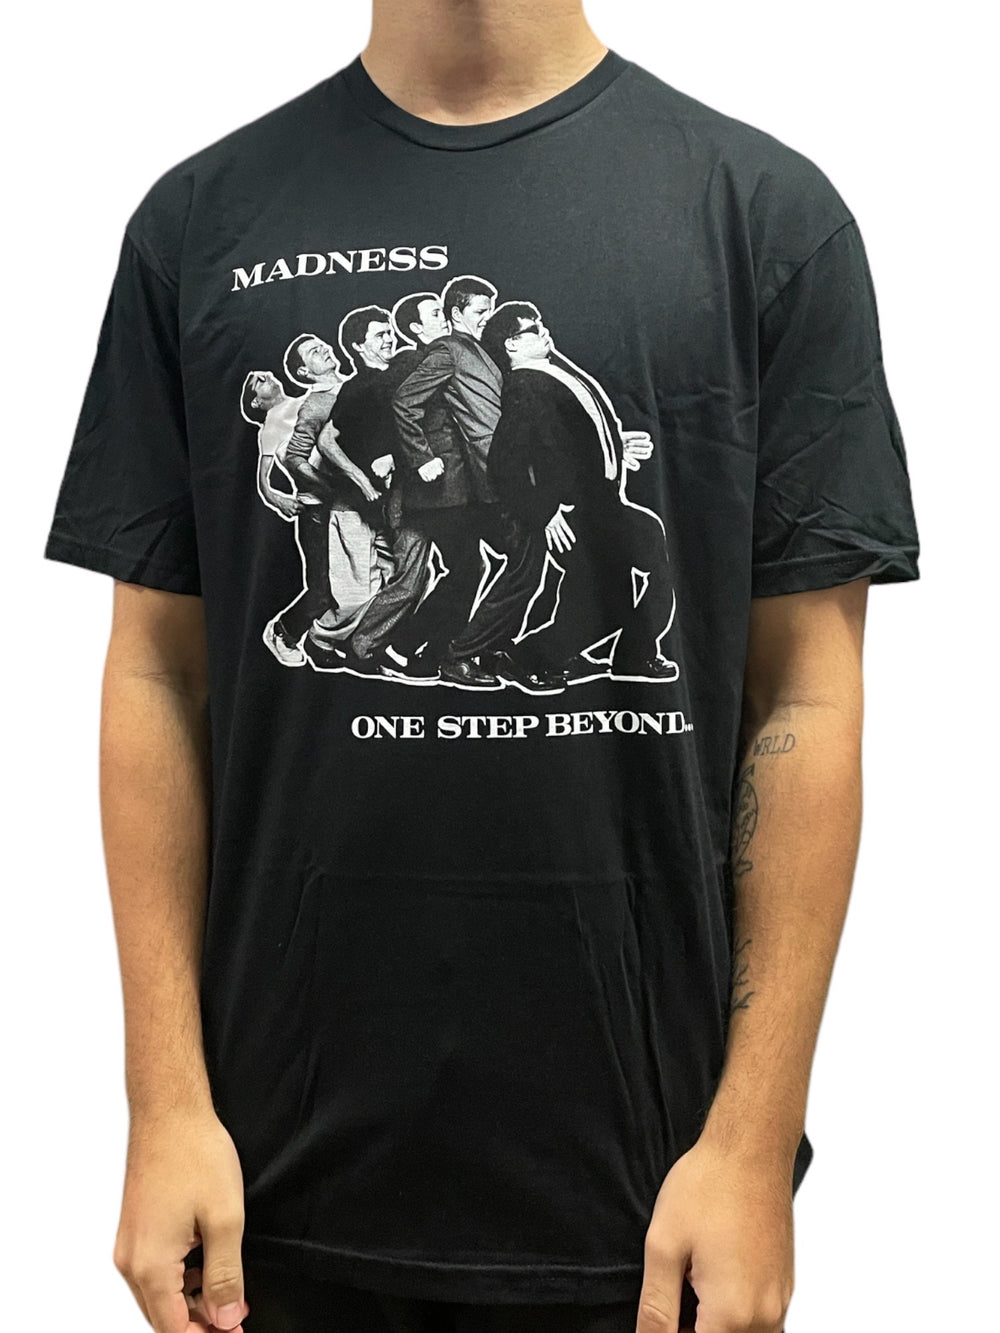 Madness ONE STEP BEYOND Black Unisex Official T Shirt Various Sizes NEW